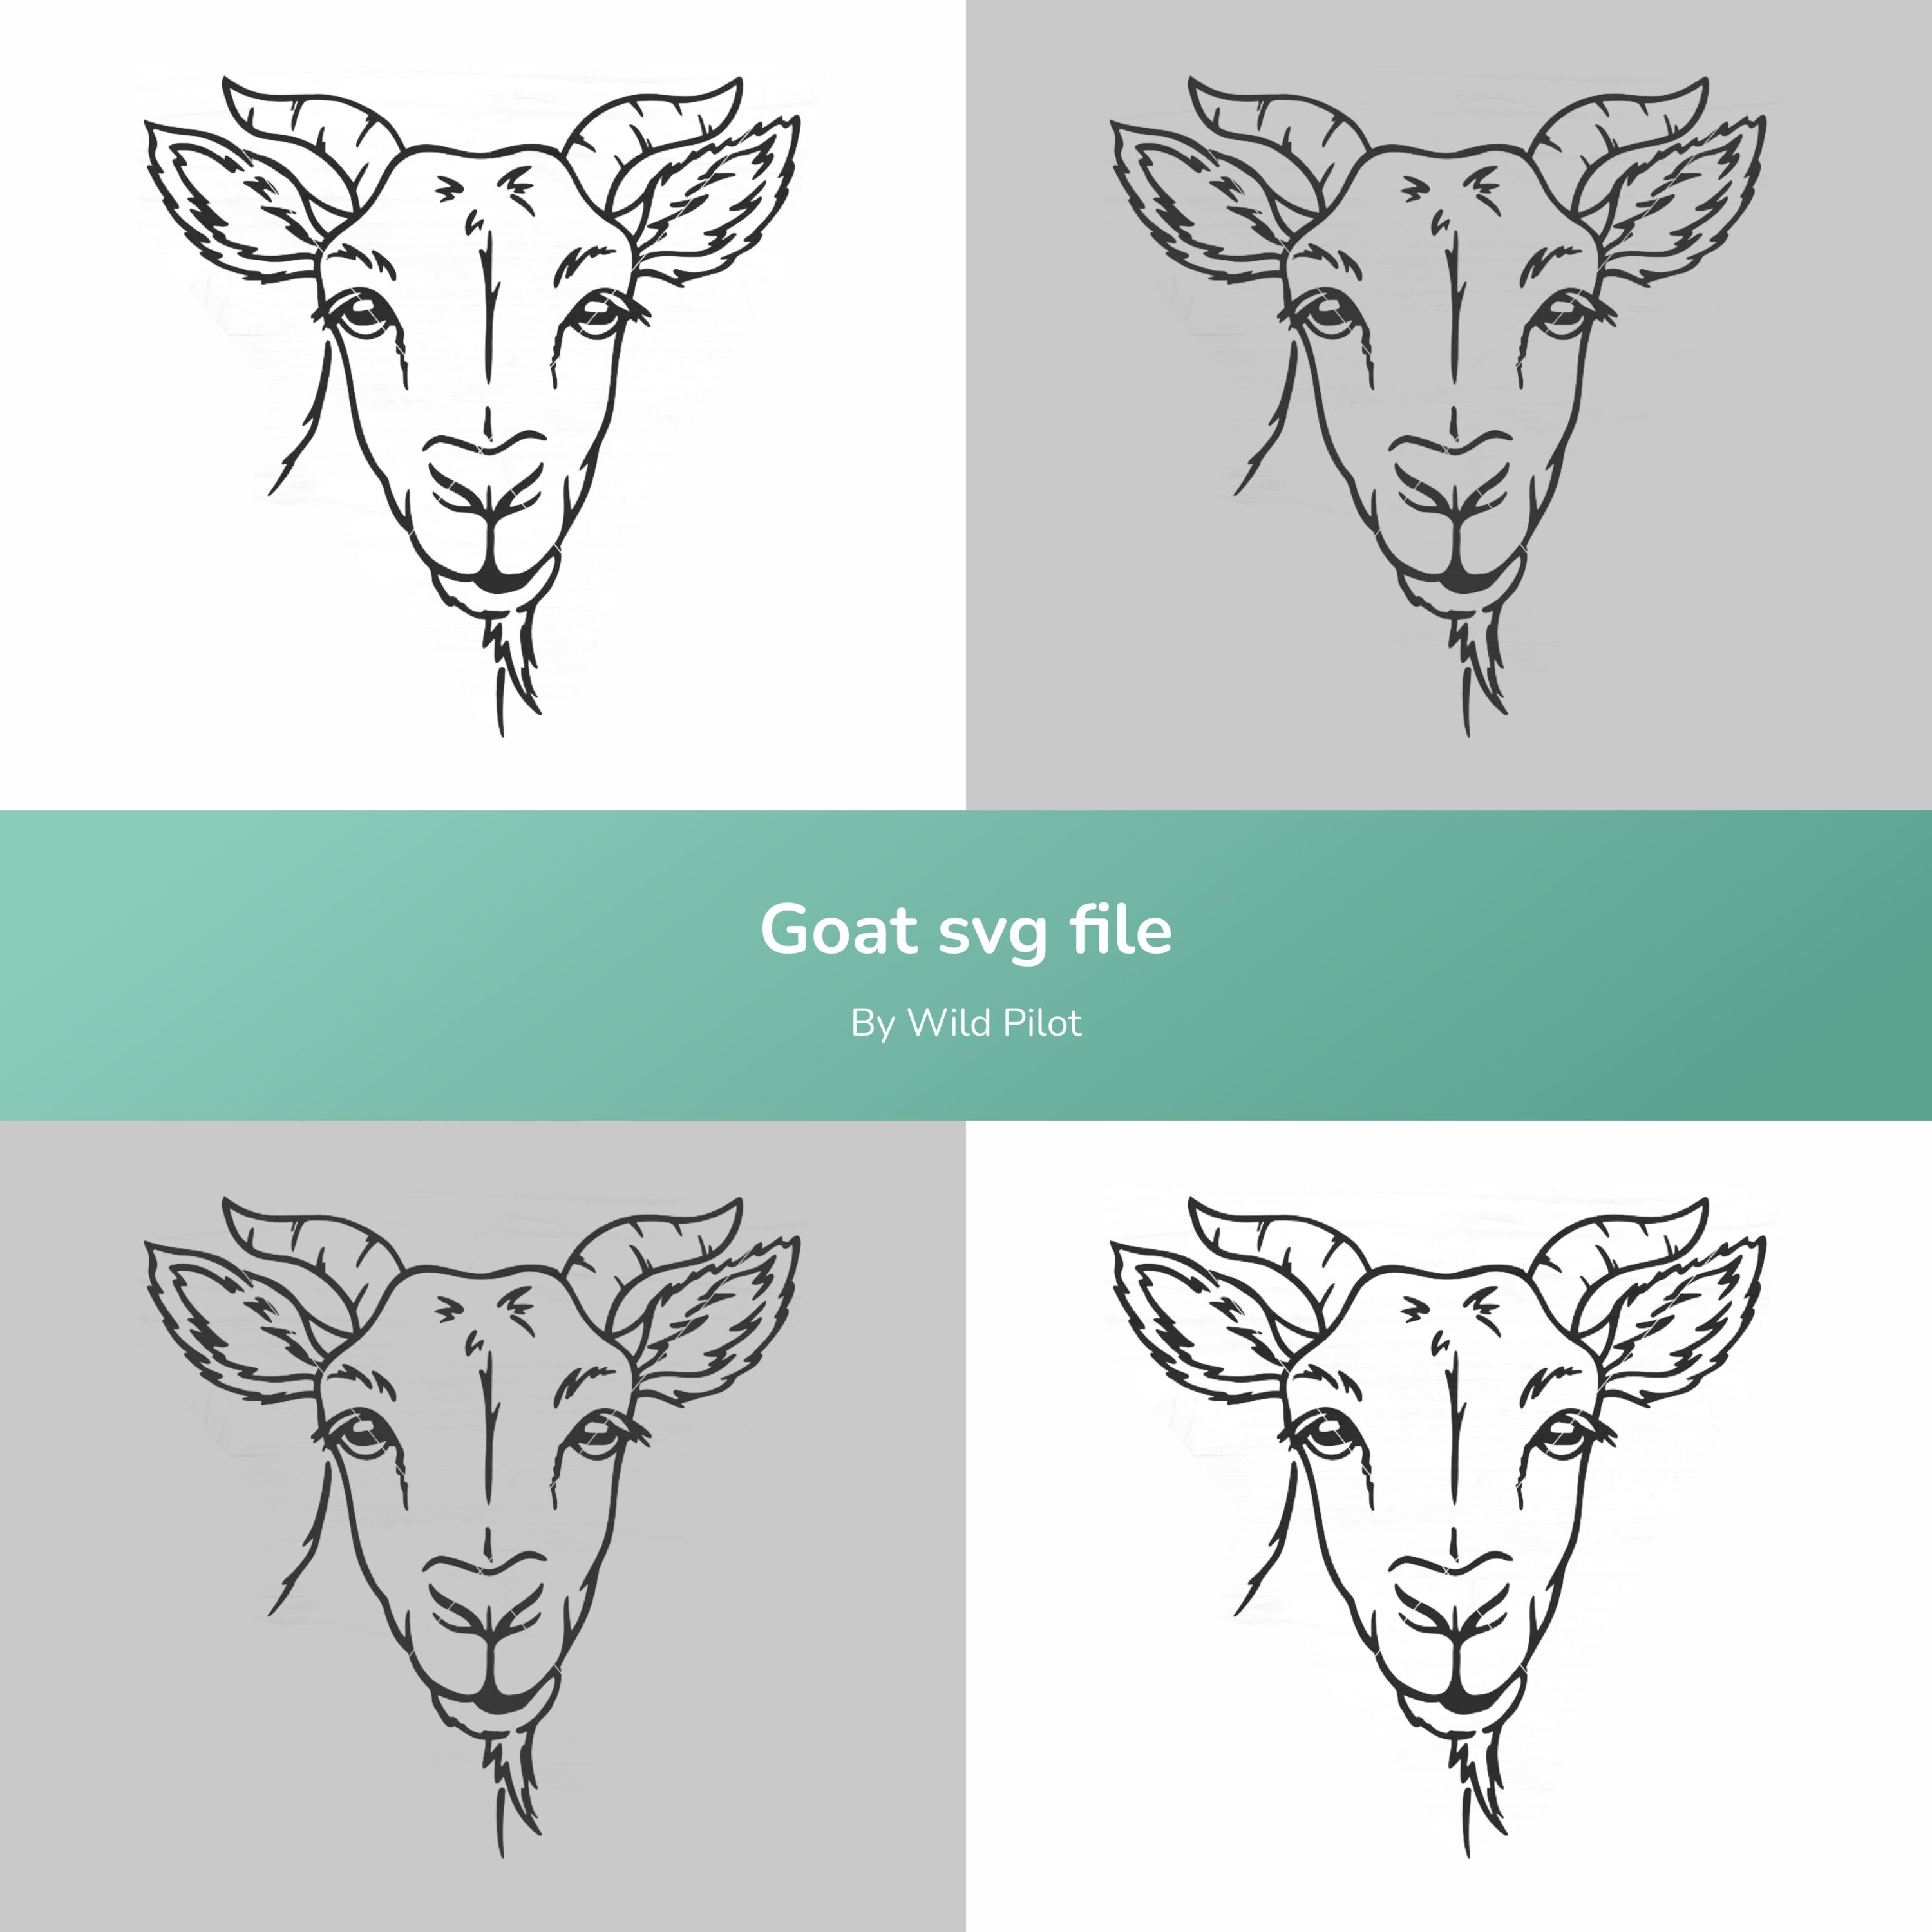 Goat's head is shown in four different colors.